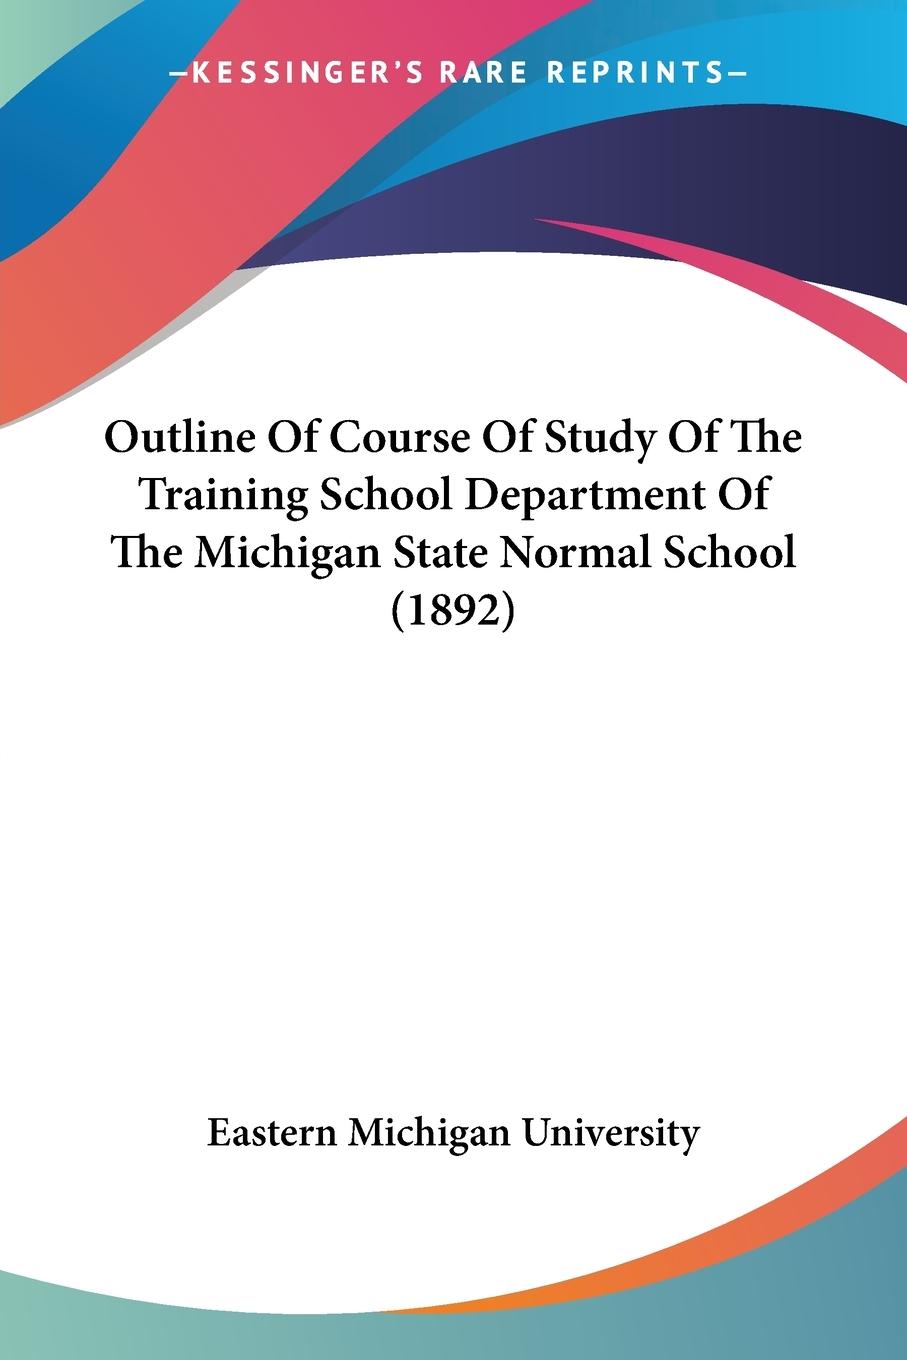 Outline Of Course Of Study Of The Training School Department Of The Michigan State Normal School (1892) - Eastern Michigan University